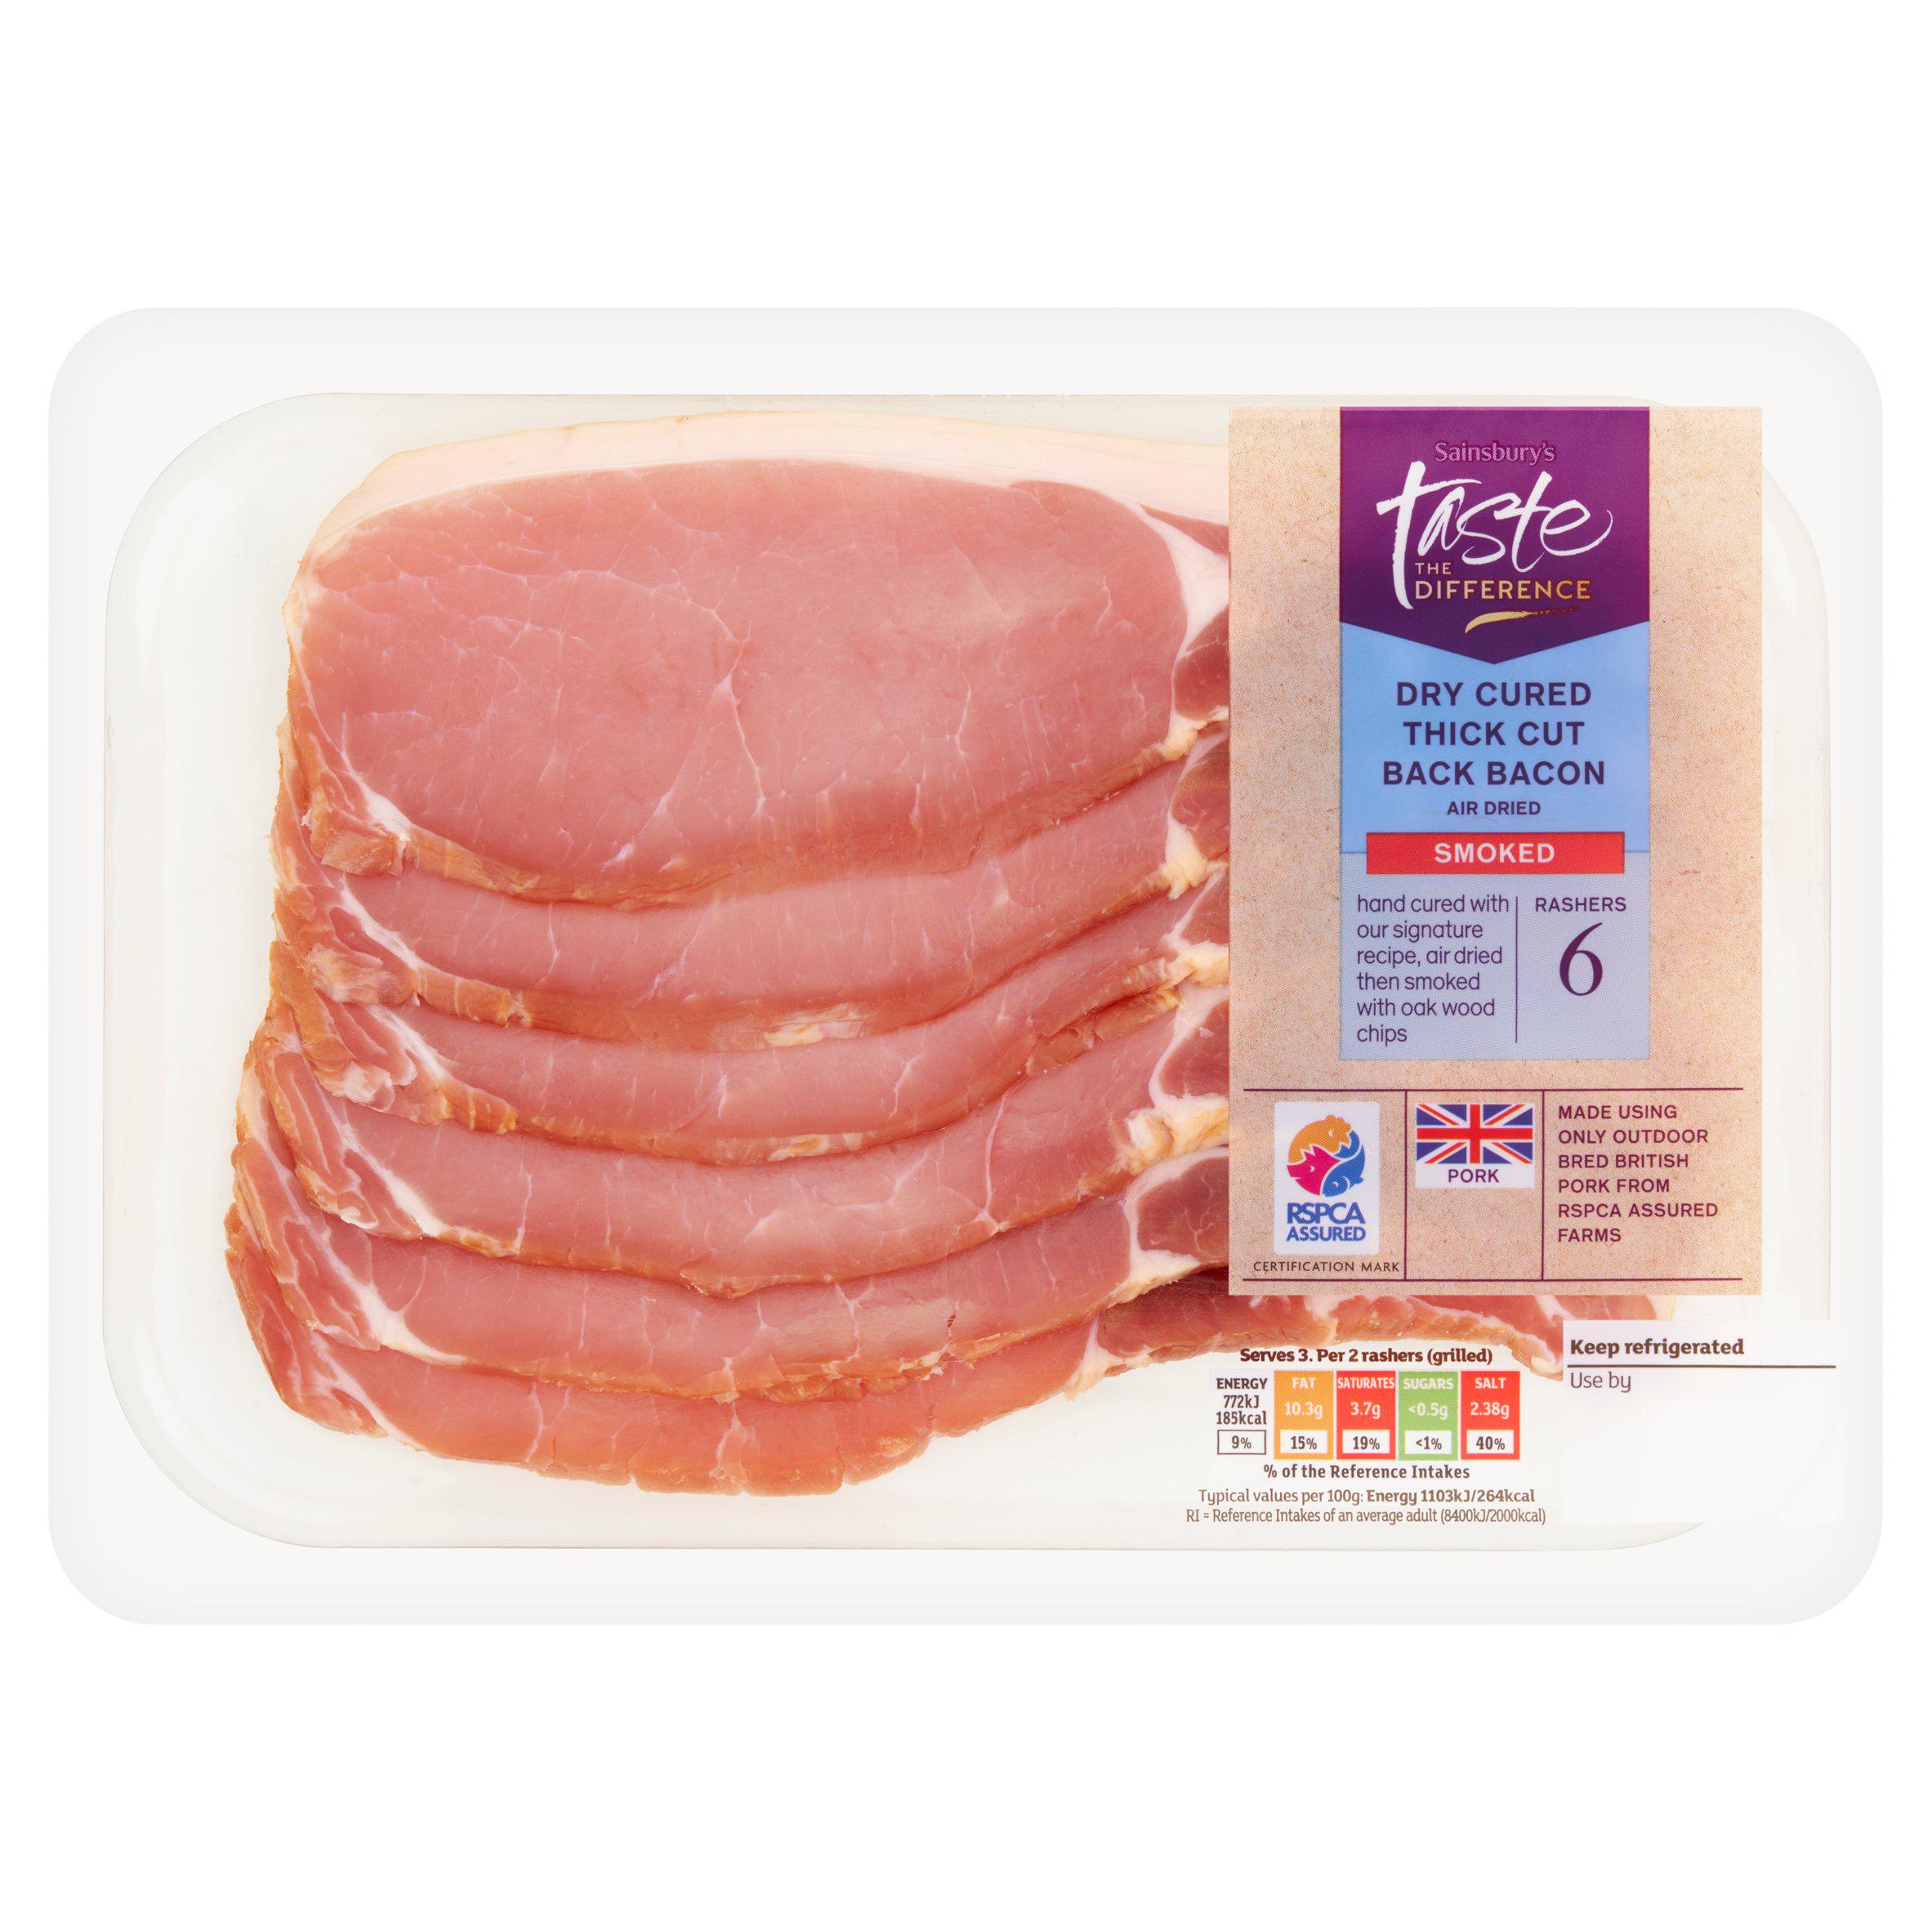 Sainsbury's Thick Cut Back Bacon Rashers Air Dried Smoked, Taste the Difference x6 300g